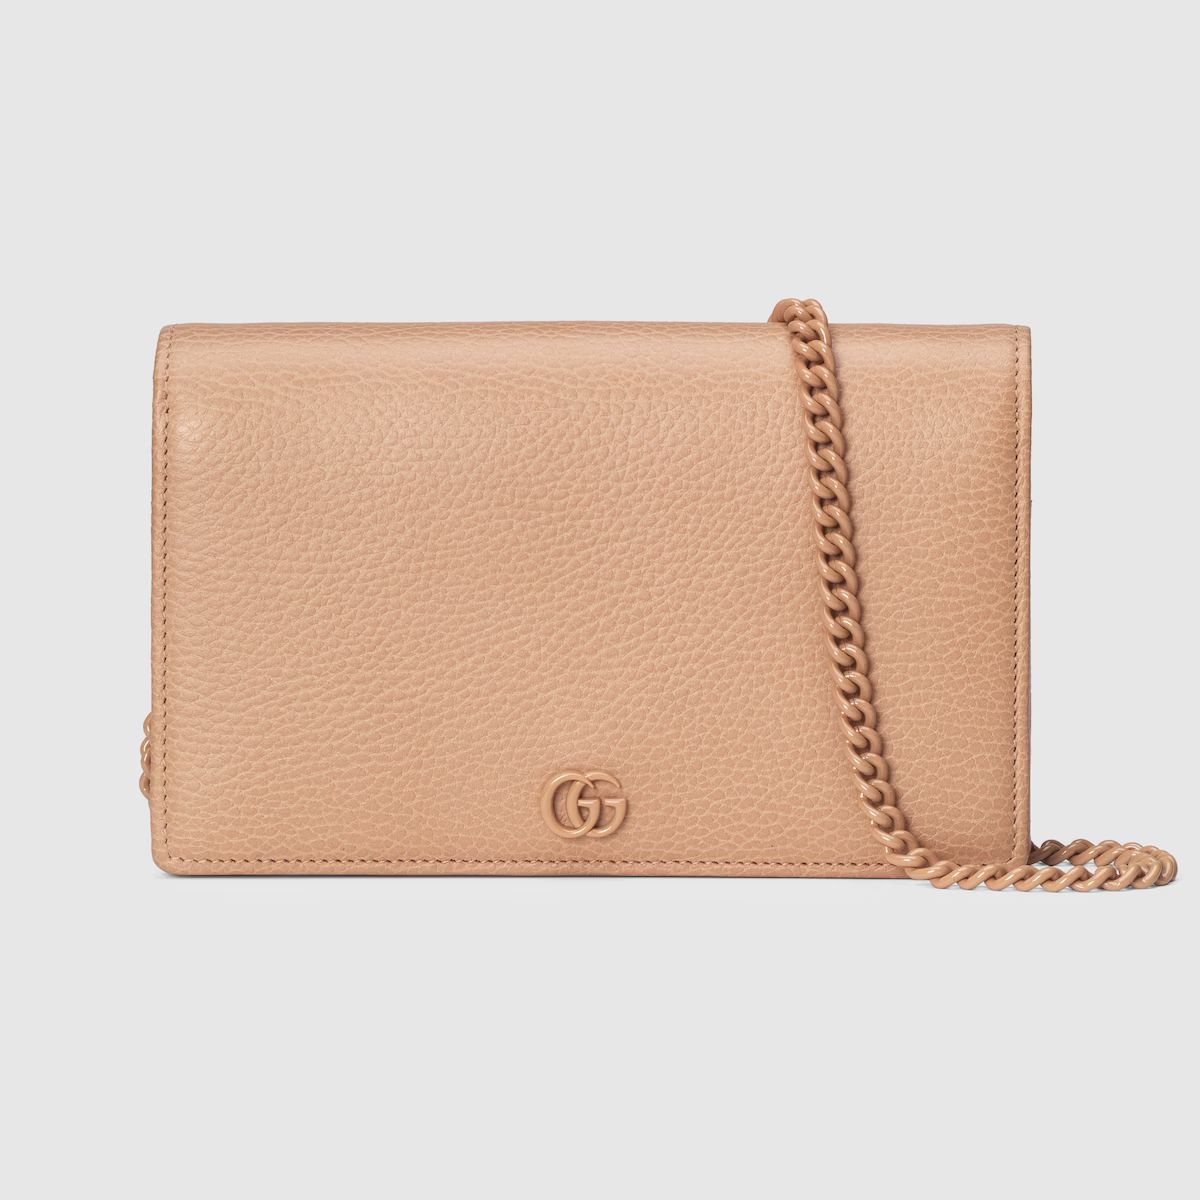 Gucci GG Marmont chain wallet | Gucci (US)